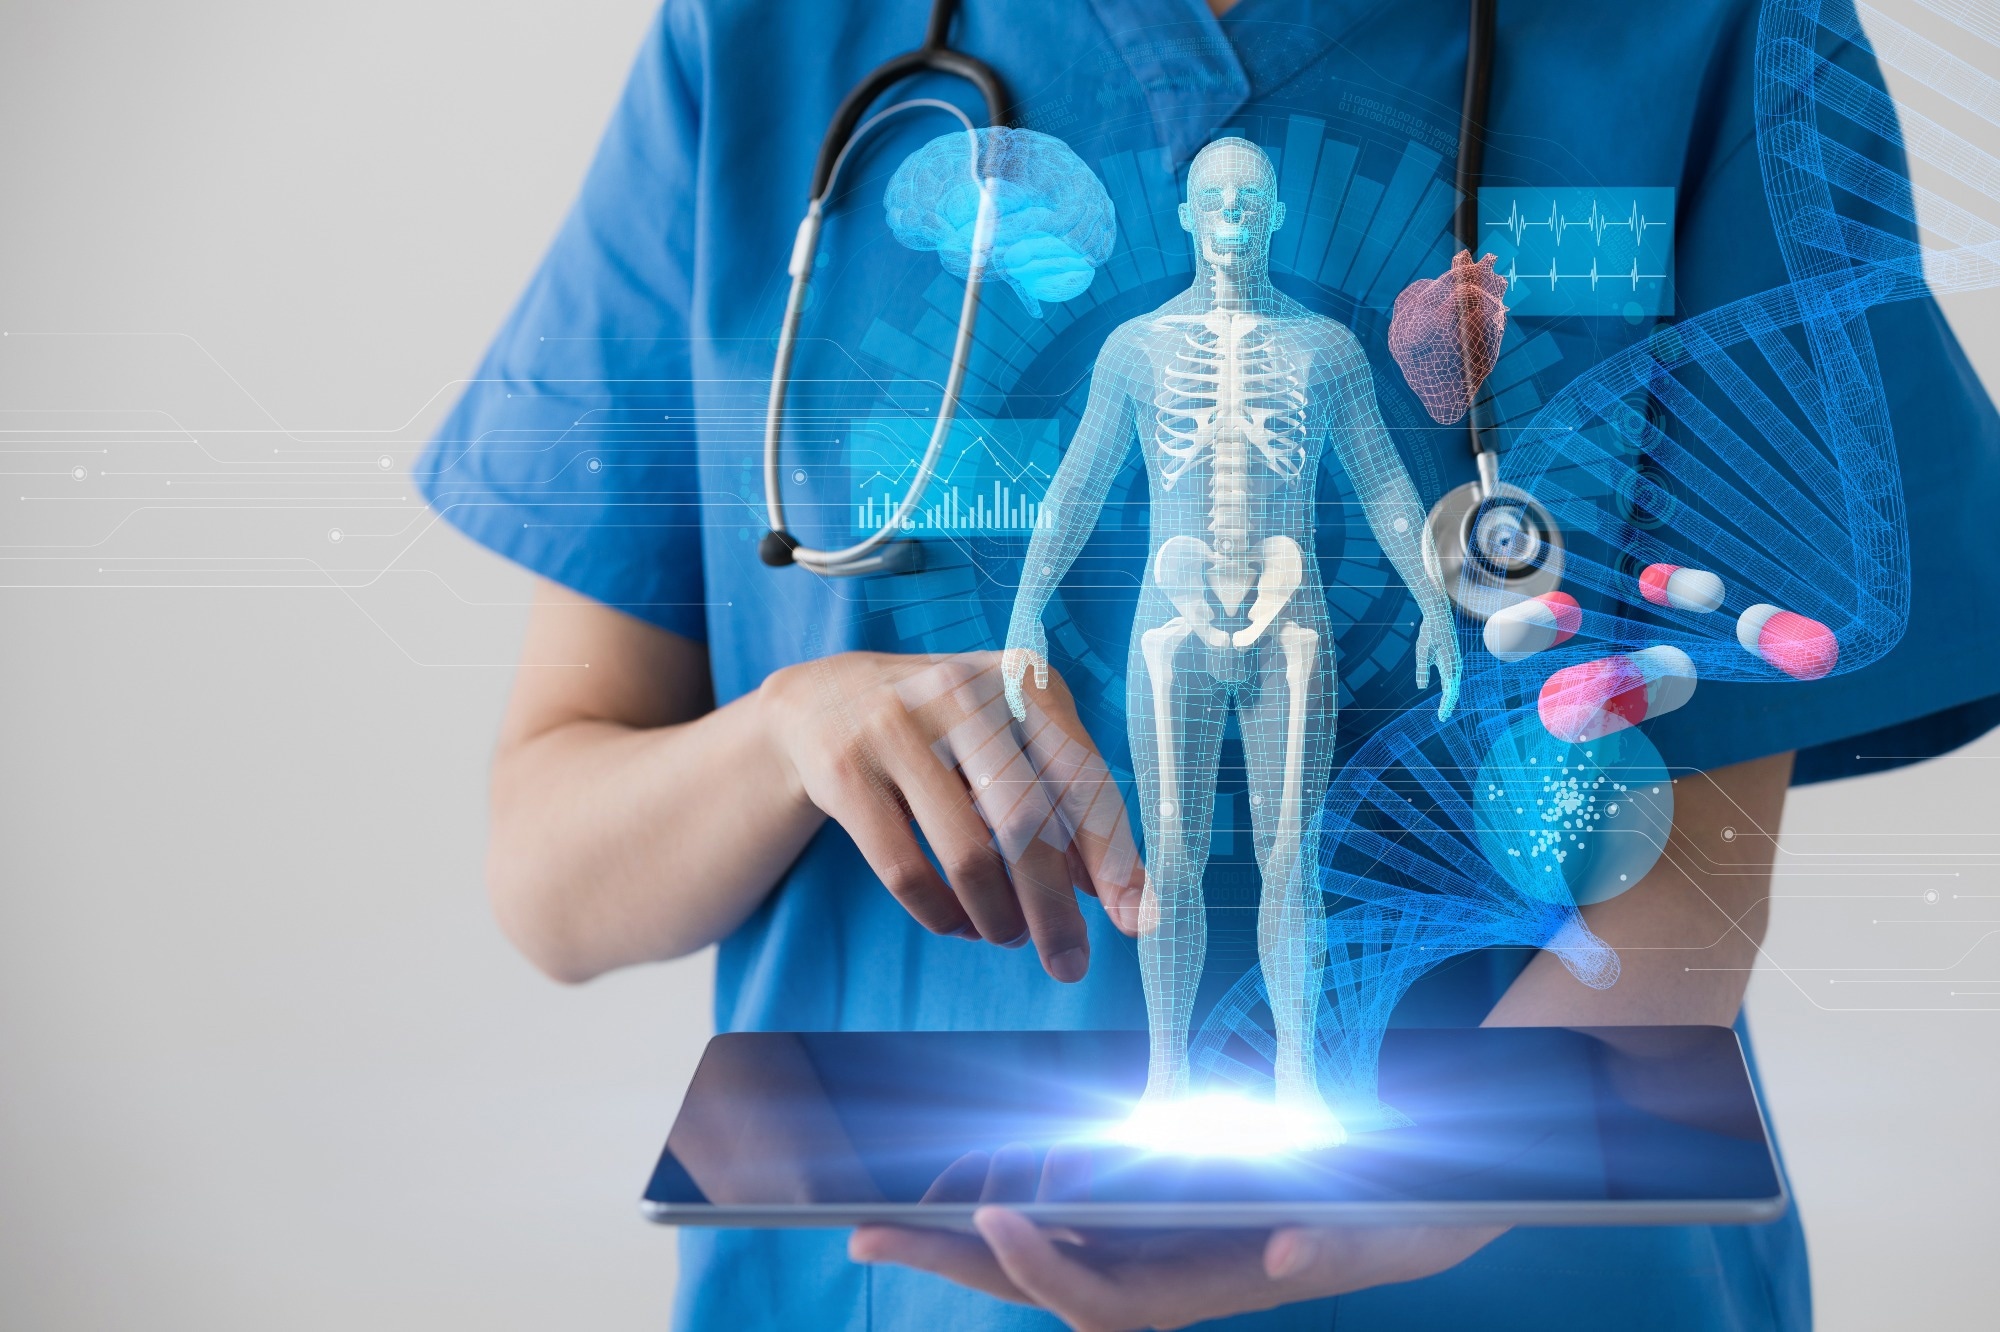 Study: Uses and limitations of artificial intelligence for oncology. Image Credit: metamorworks/Shutterstock.com